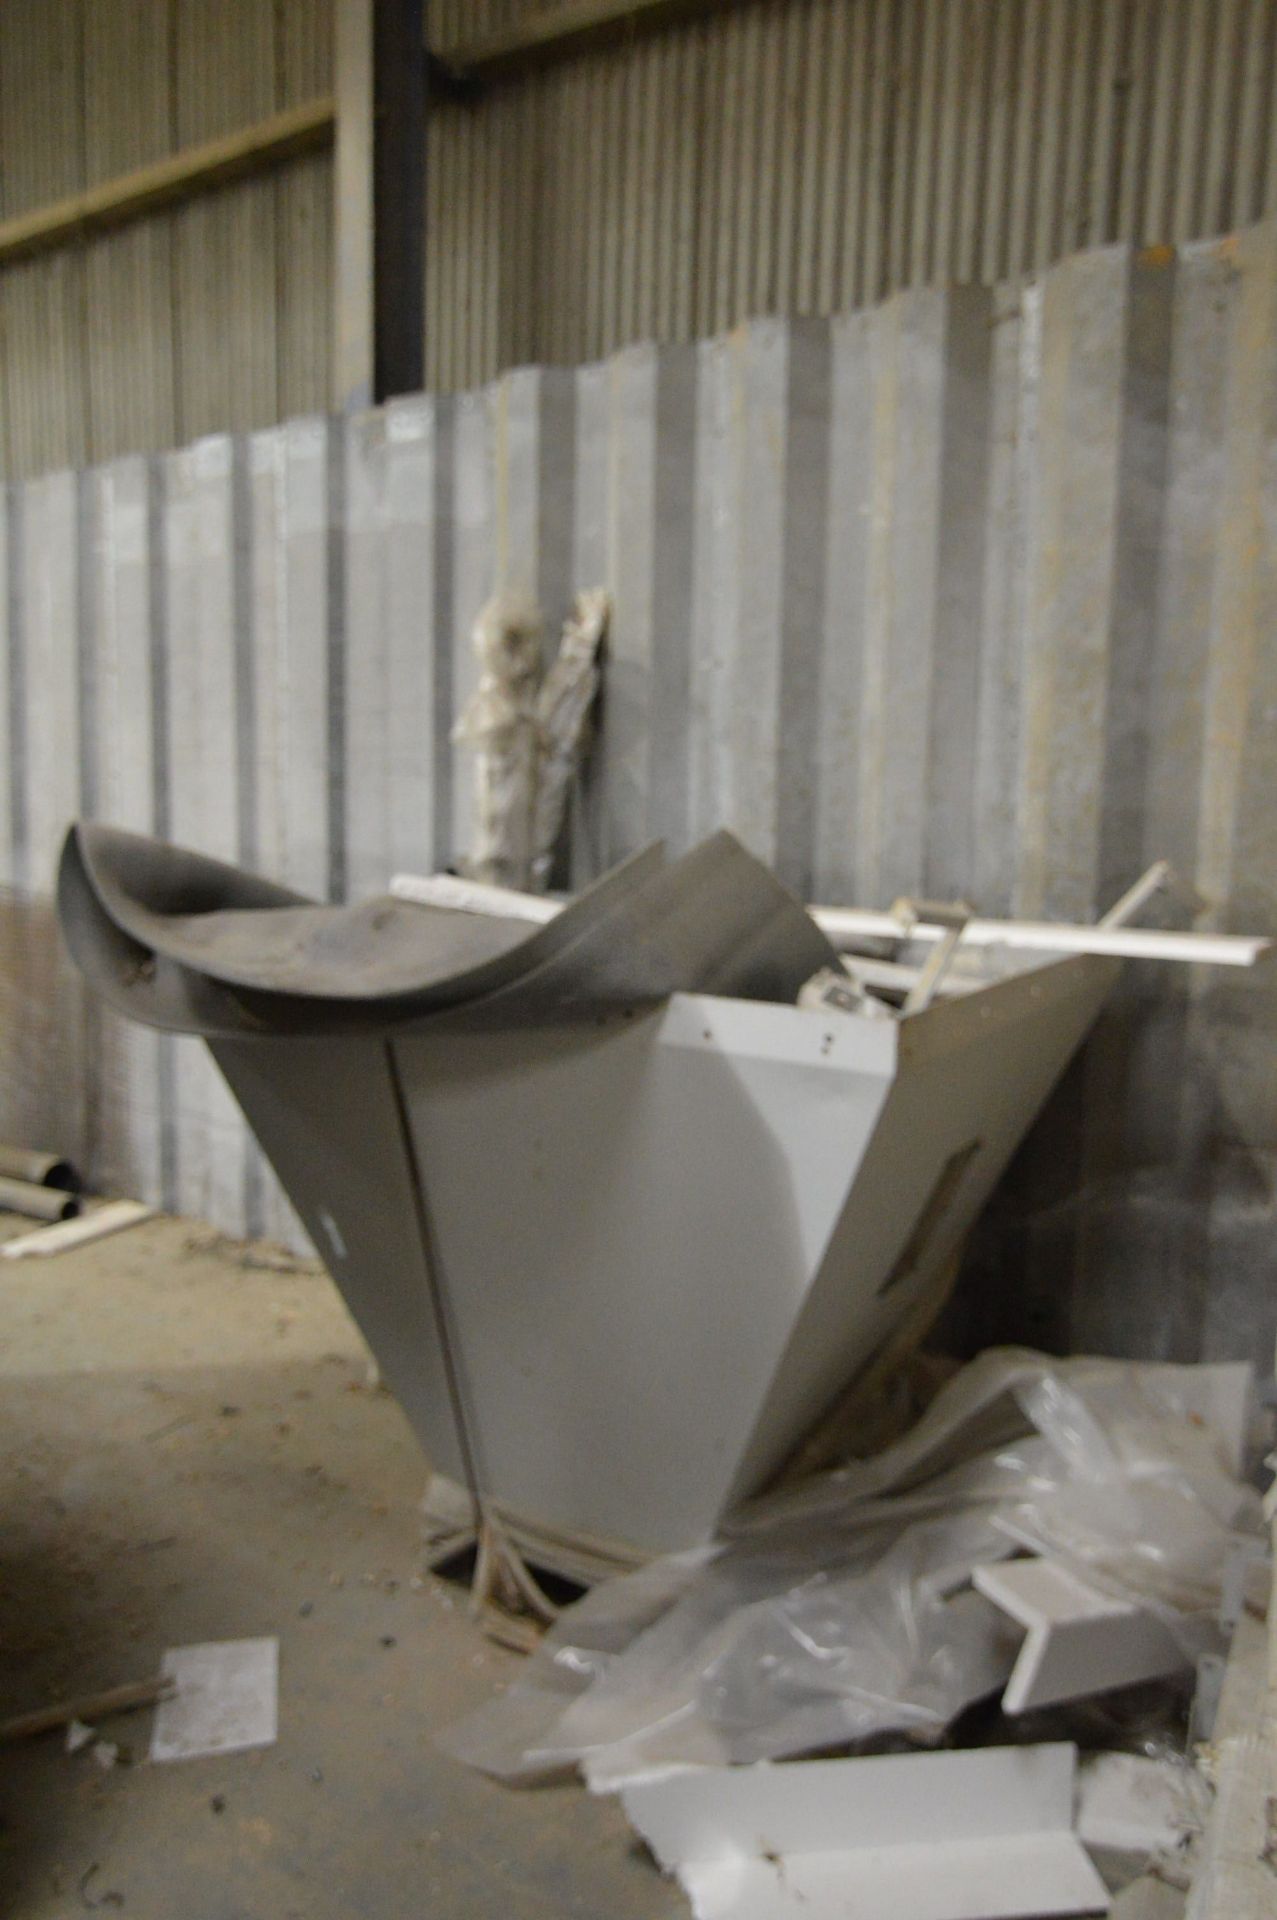 Passat STRAW BALE SHREDDER, with hopper, steel frame supports and conveyor feed unit (no chain), - Image 9 of 14